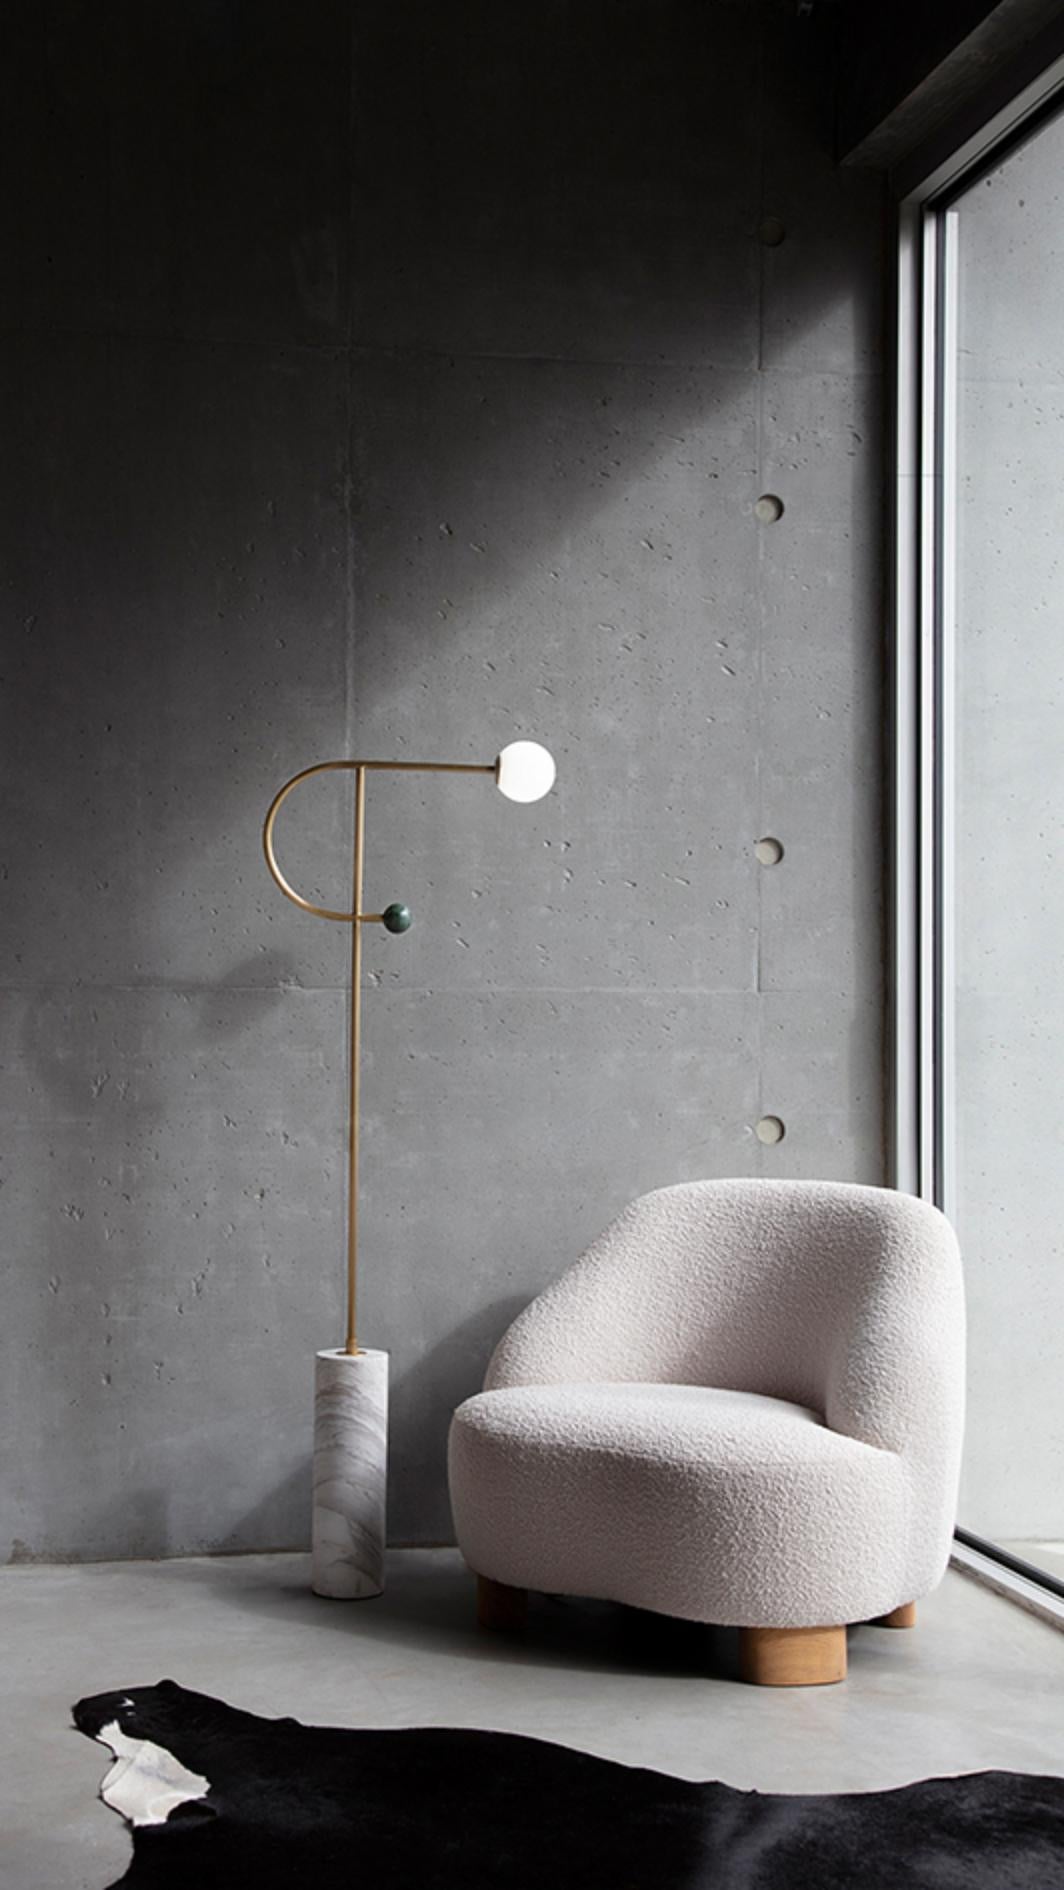 Orb 2 Floor Lamp by Square in Circle
Dimensions:  W 58 x H 165 cm
Materials: Brass, Marble.

Square in circle is a London-based design studio founded in 2019. The studio explores lighting design in minimal, geometric forms inspired by the Modernist